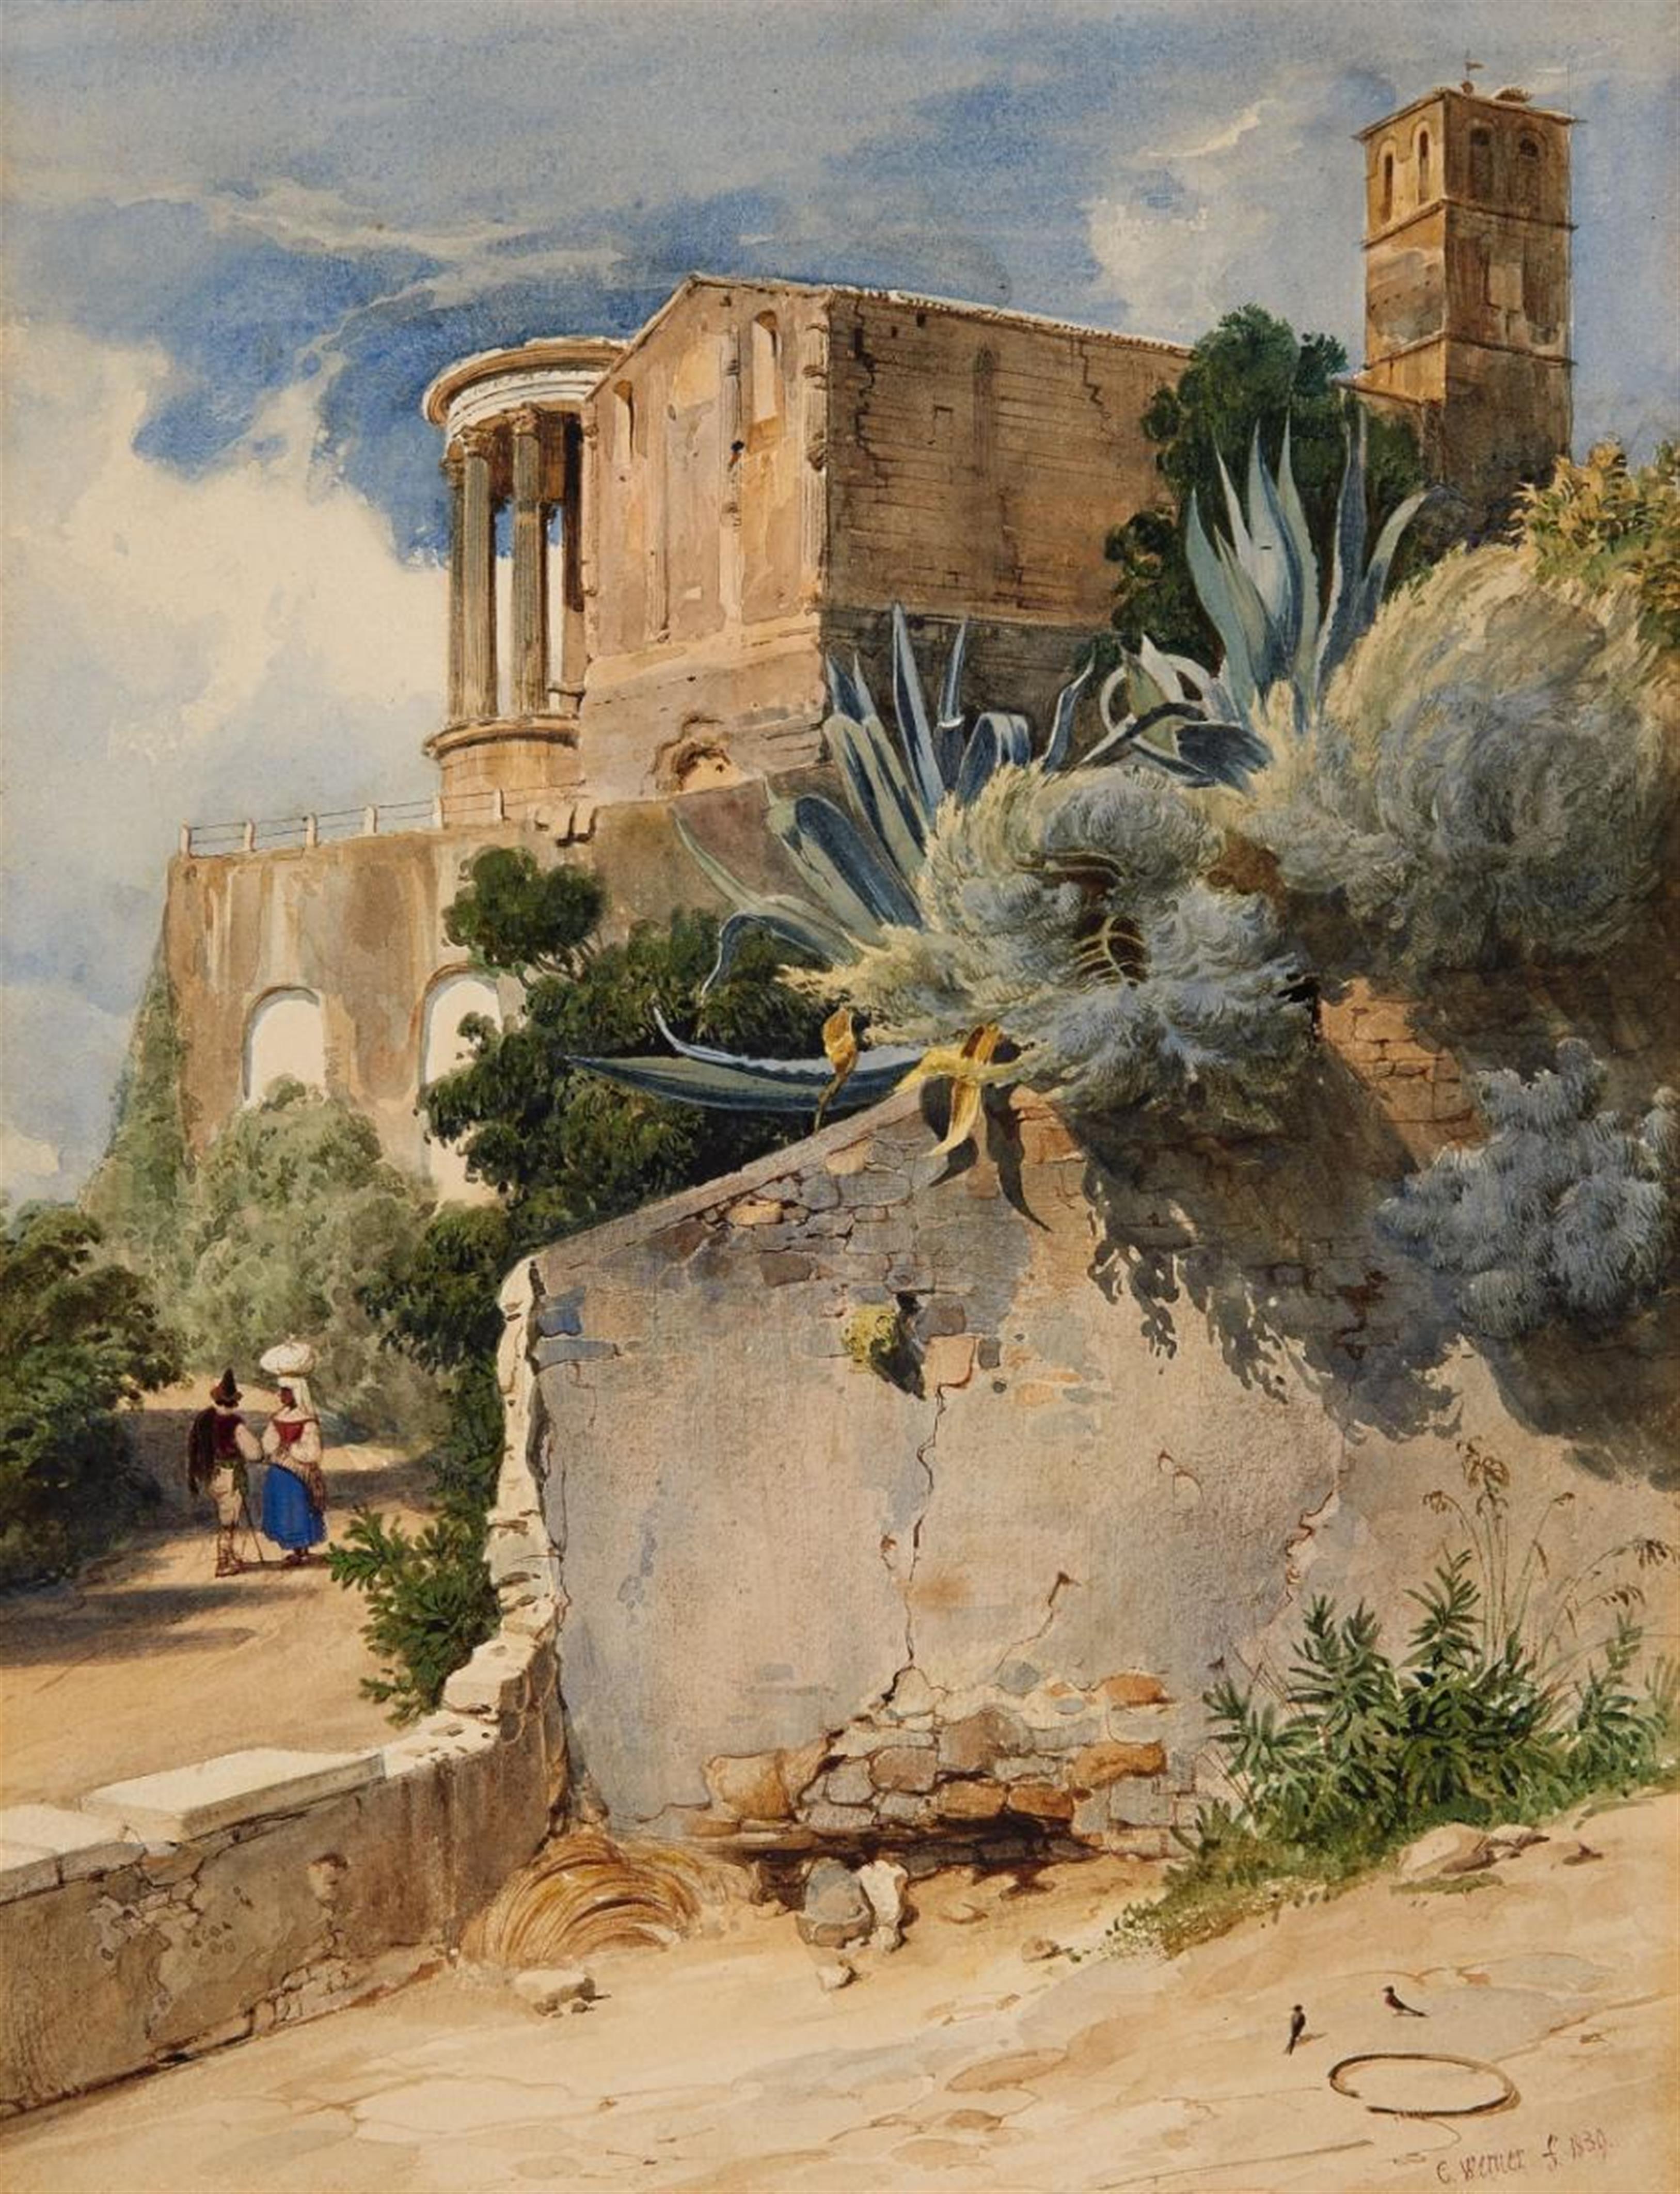 Carl Werner - A VIEW OF THE TEMPLE OF THE TIBURTINE SIBYL IN TIVOLI - image-1